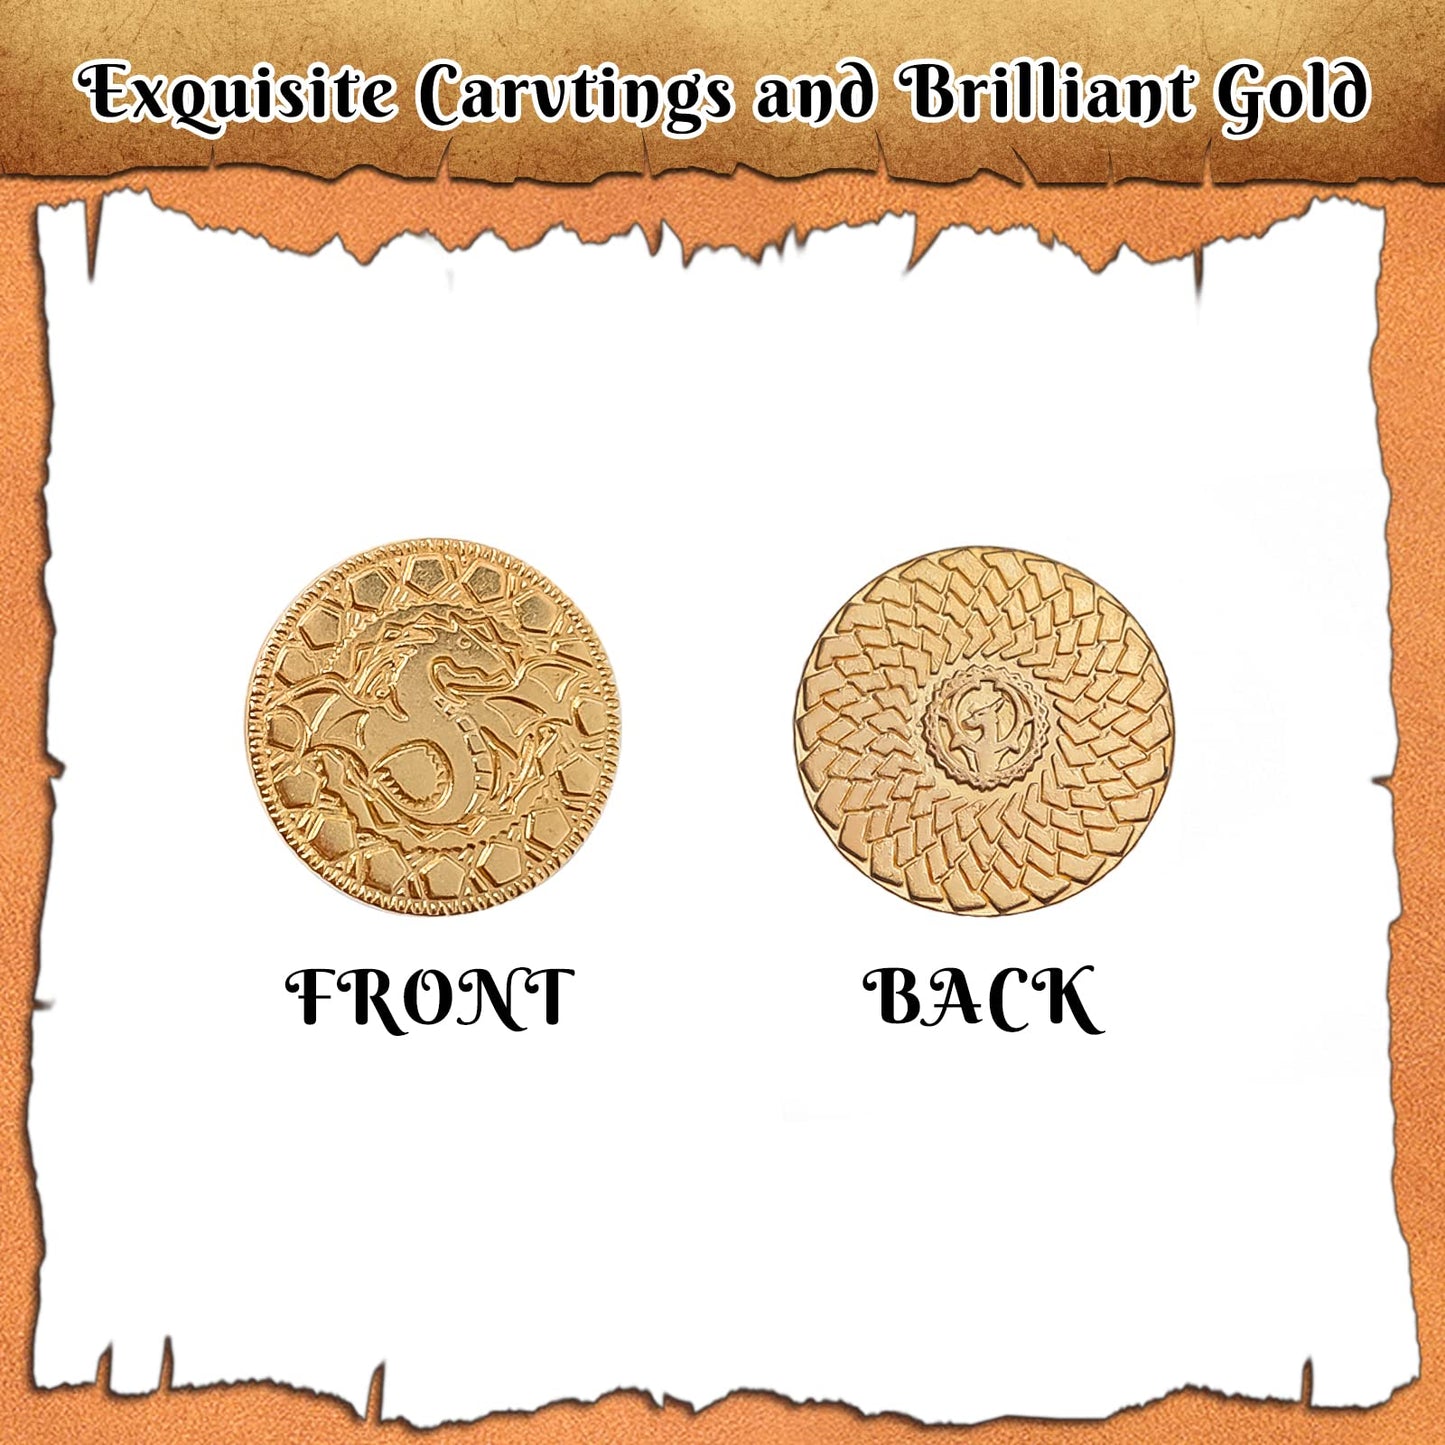 100 Metal Gloden Coins with Leather Bag, Fantasy DND Coins for Board Game Accessories, Actual Weight Gloen Game Token, DND Gift for DM, Treasure Hunt Coins, Medieval Cosplay Accessories